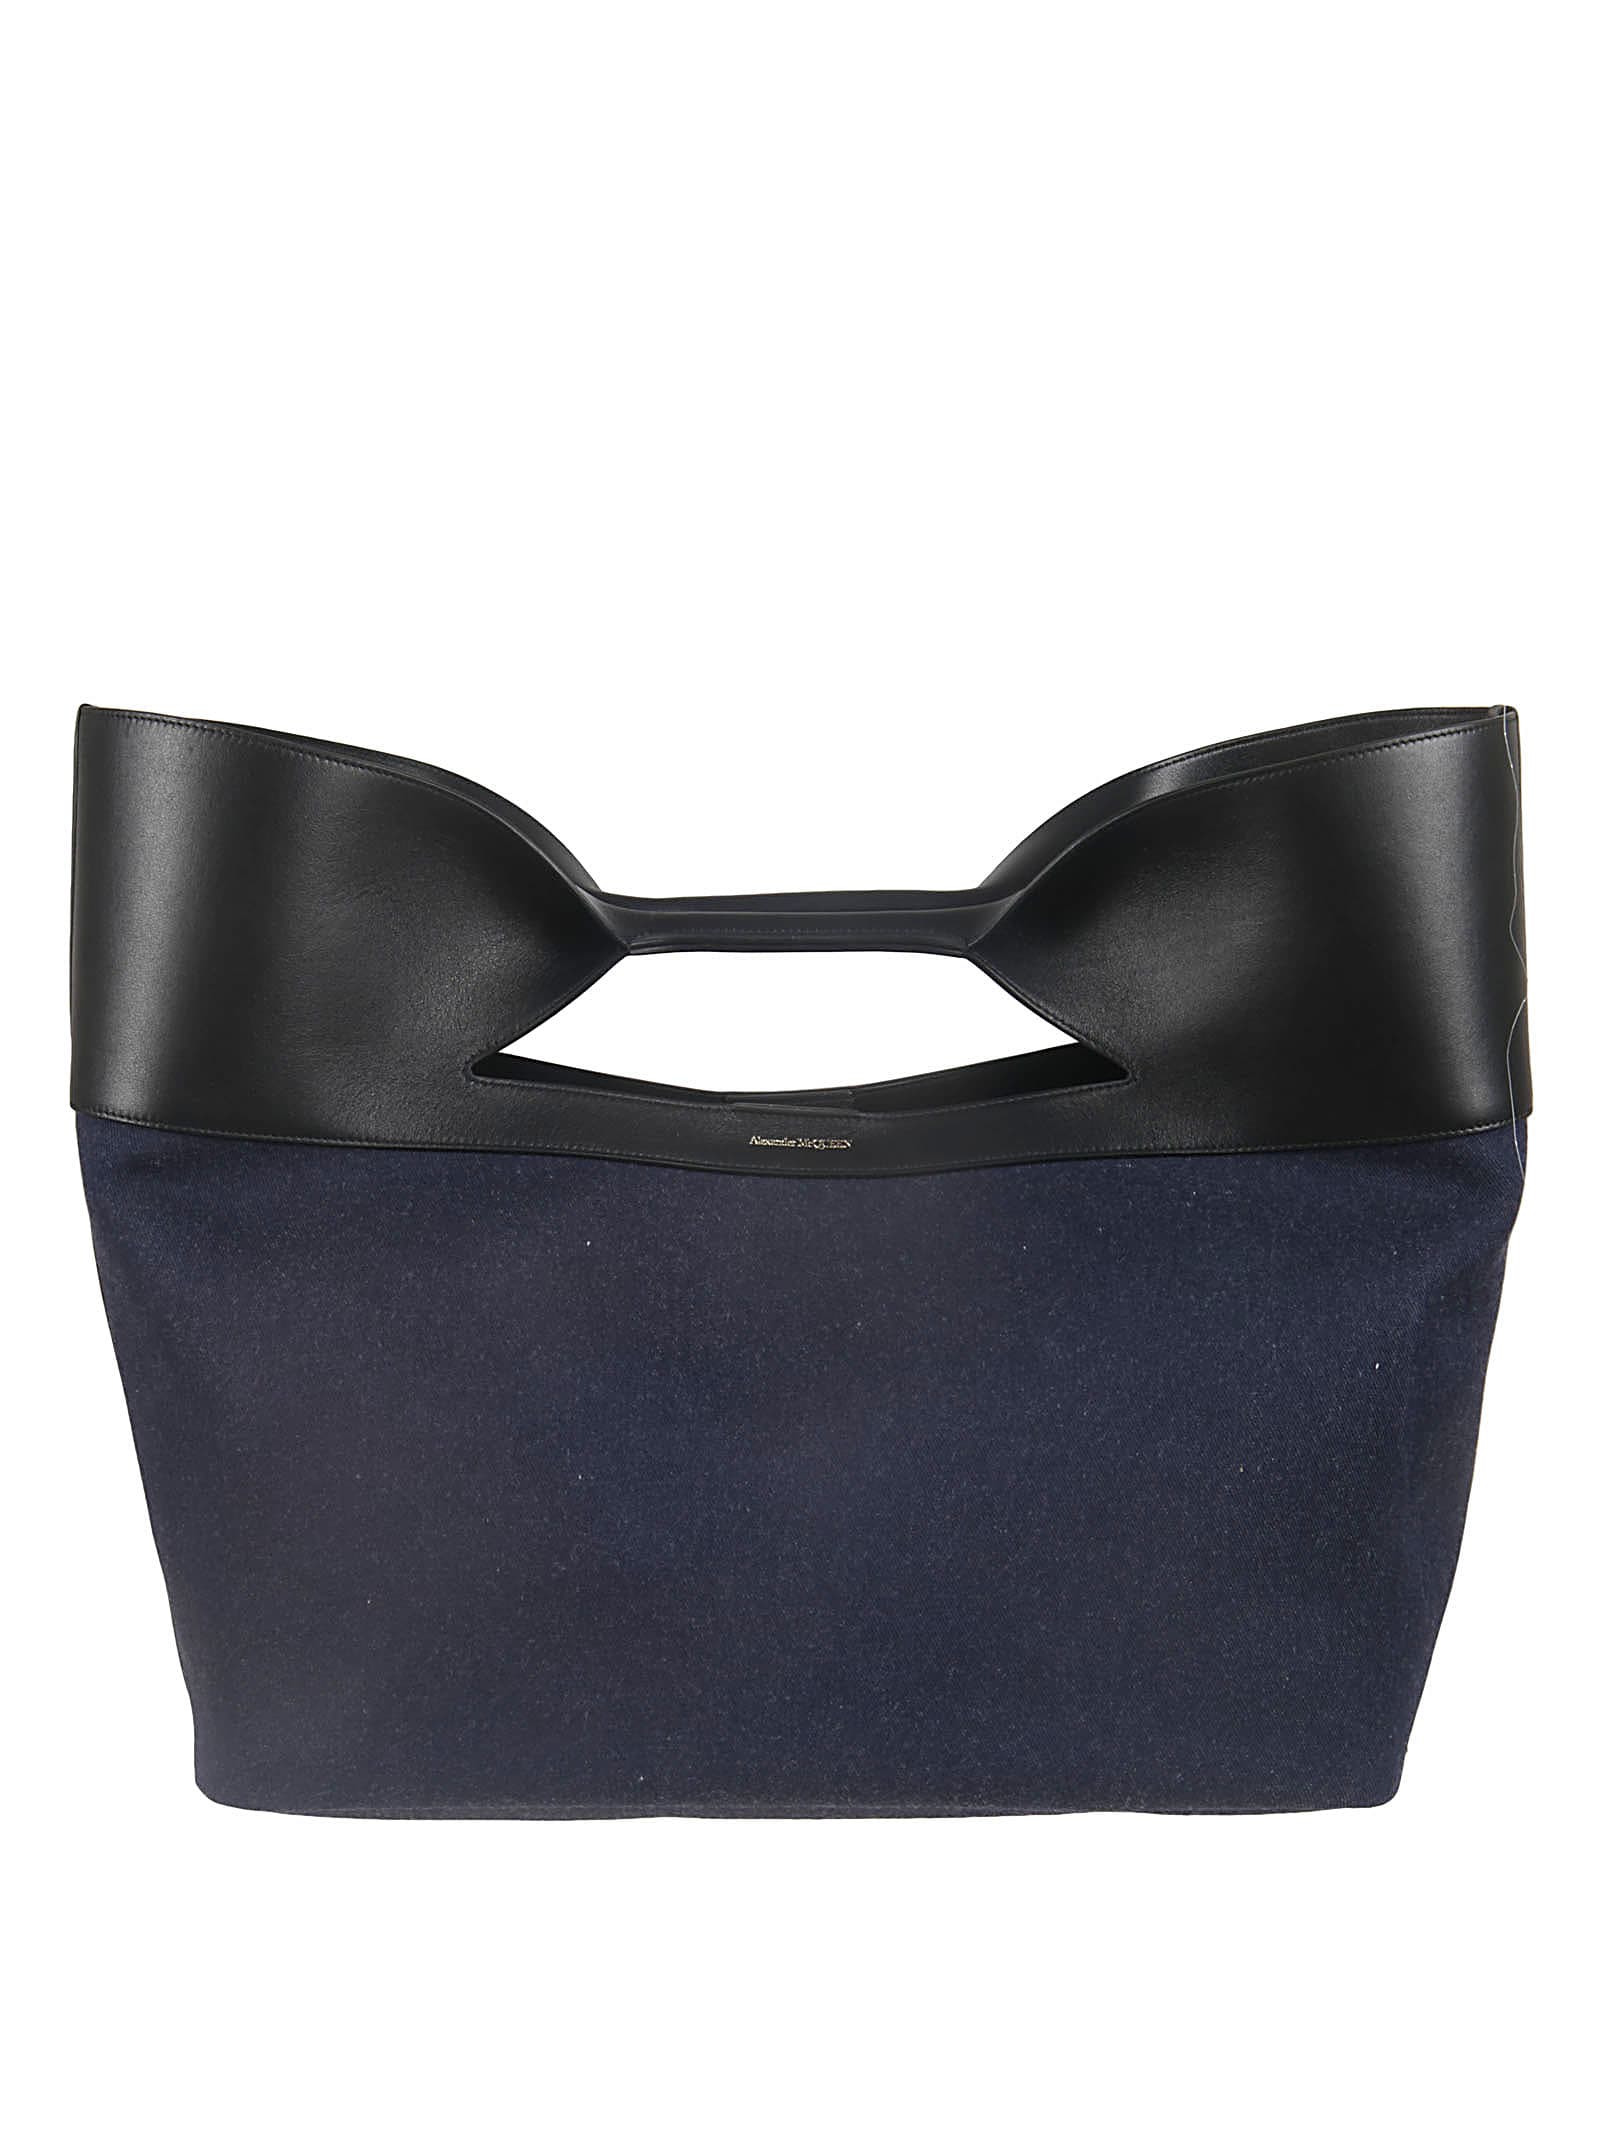 ALEXANDER MCQUEEN THE BOW LARGE HAND BAG